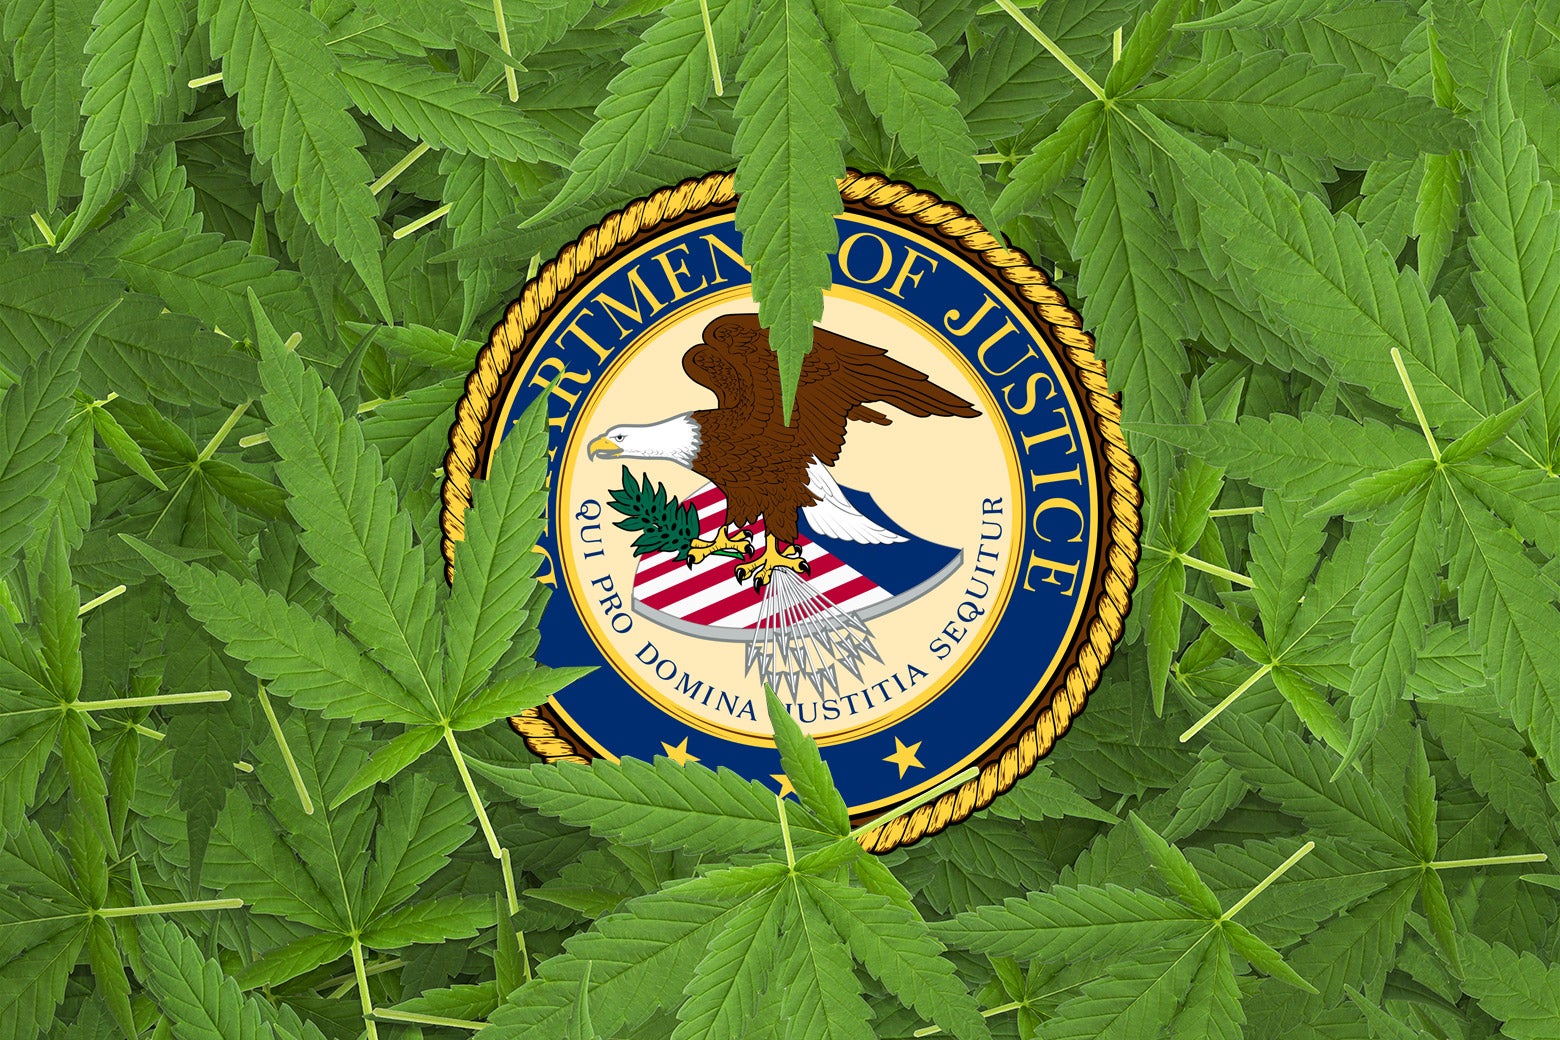 The seal of the U.S. Department of Justice buried in a pile of marijuana leaves.